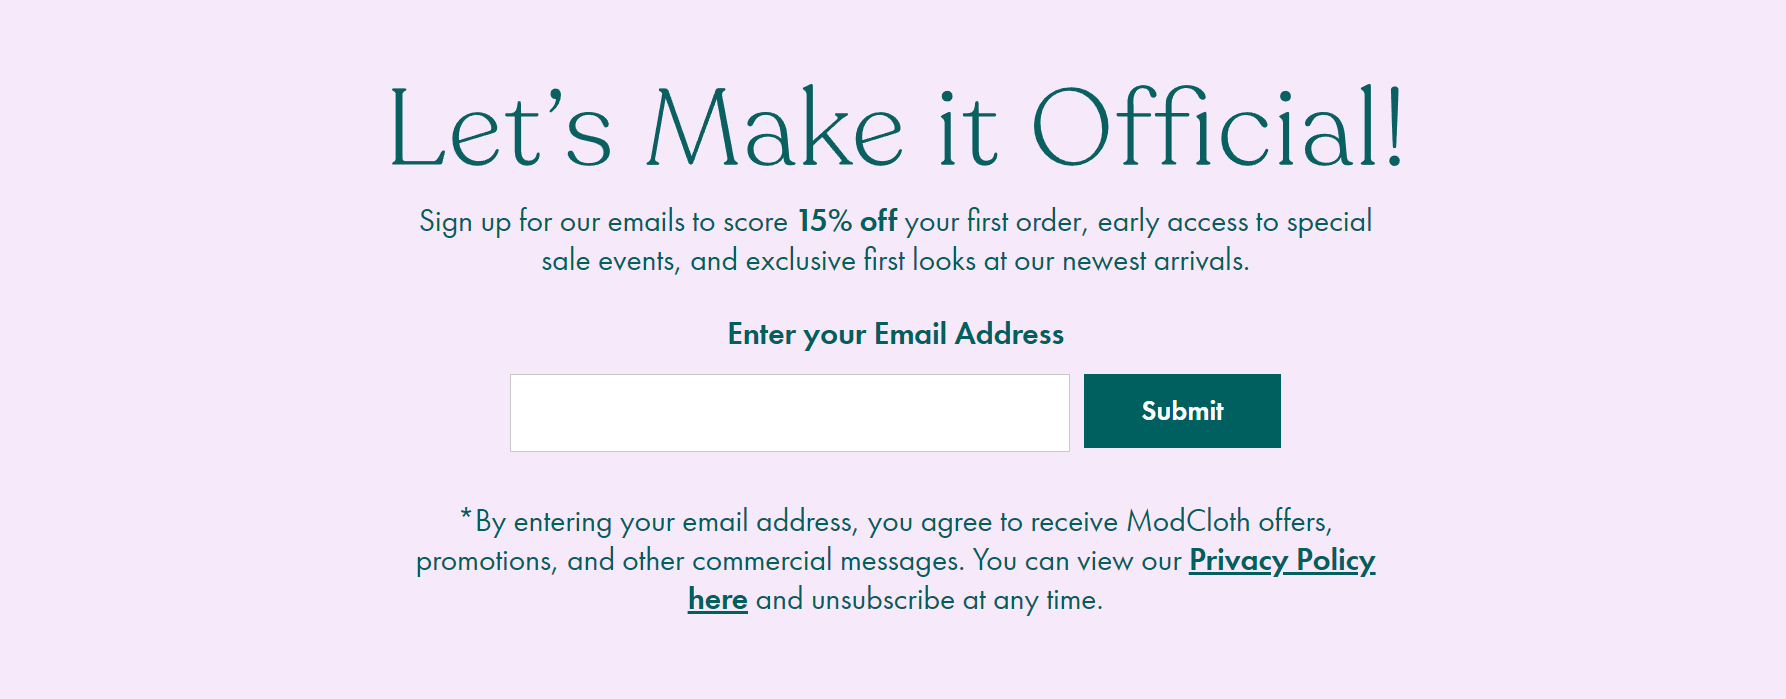 modcloth newsletter signup form for fashion 